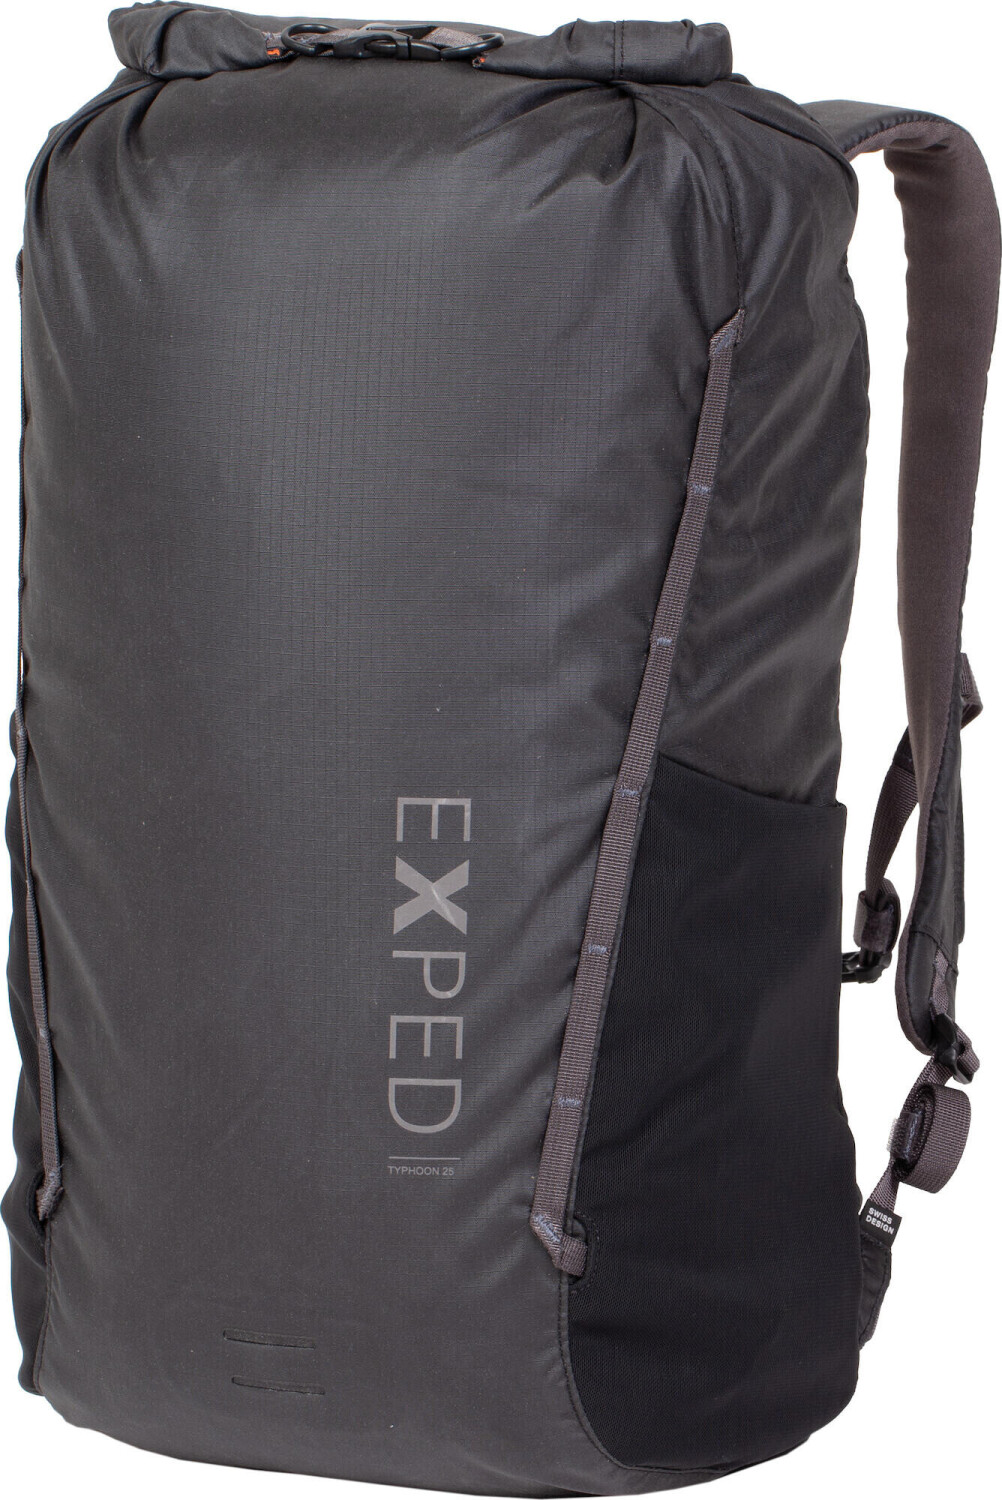 Photos - Backpack Exped Typhoon 25 black 